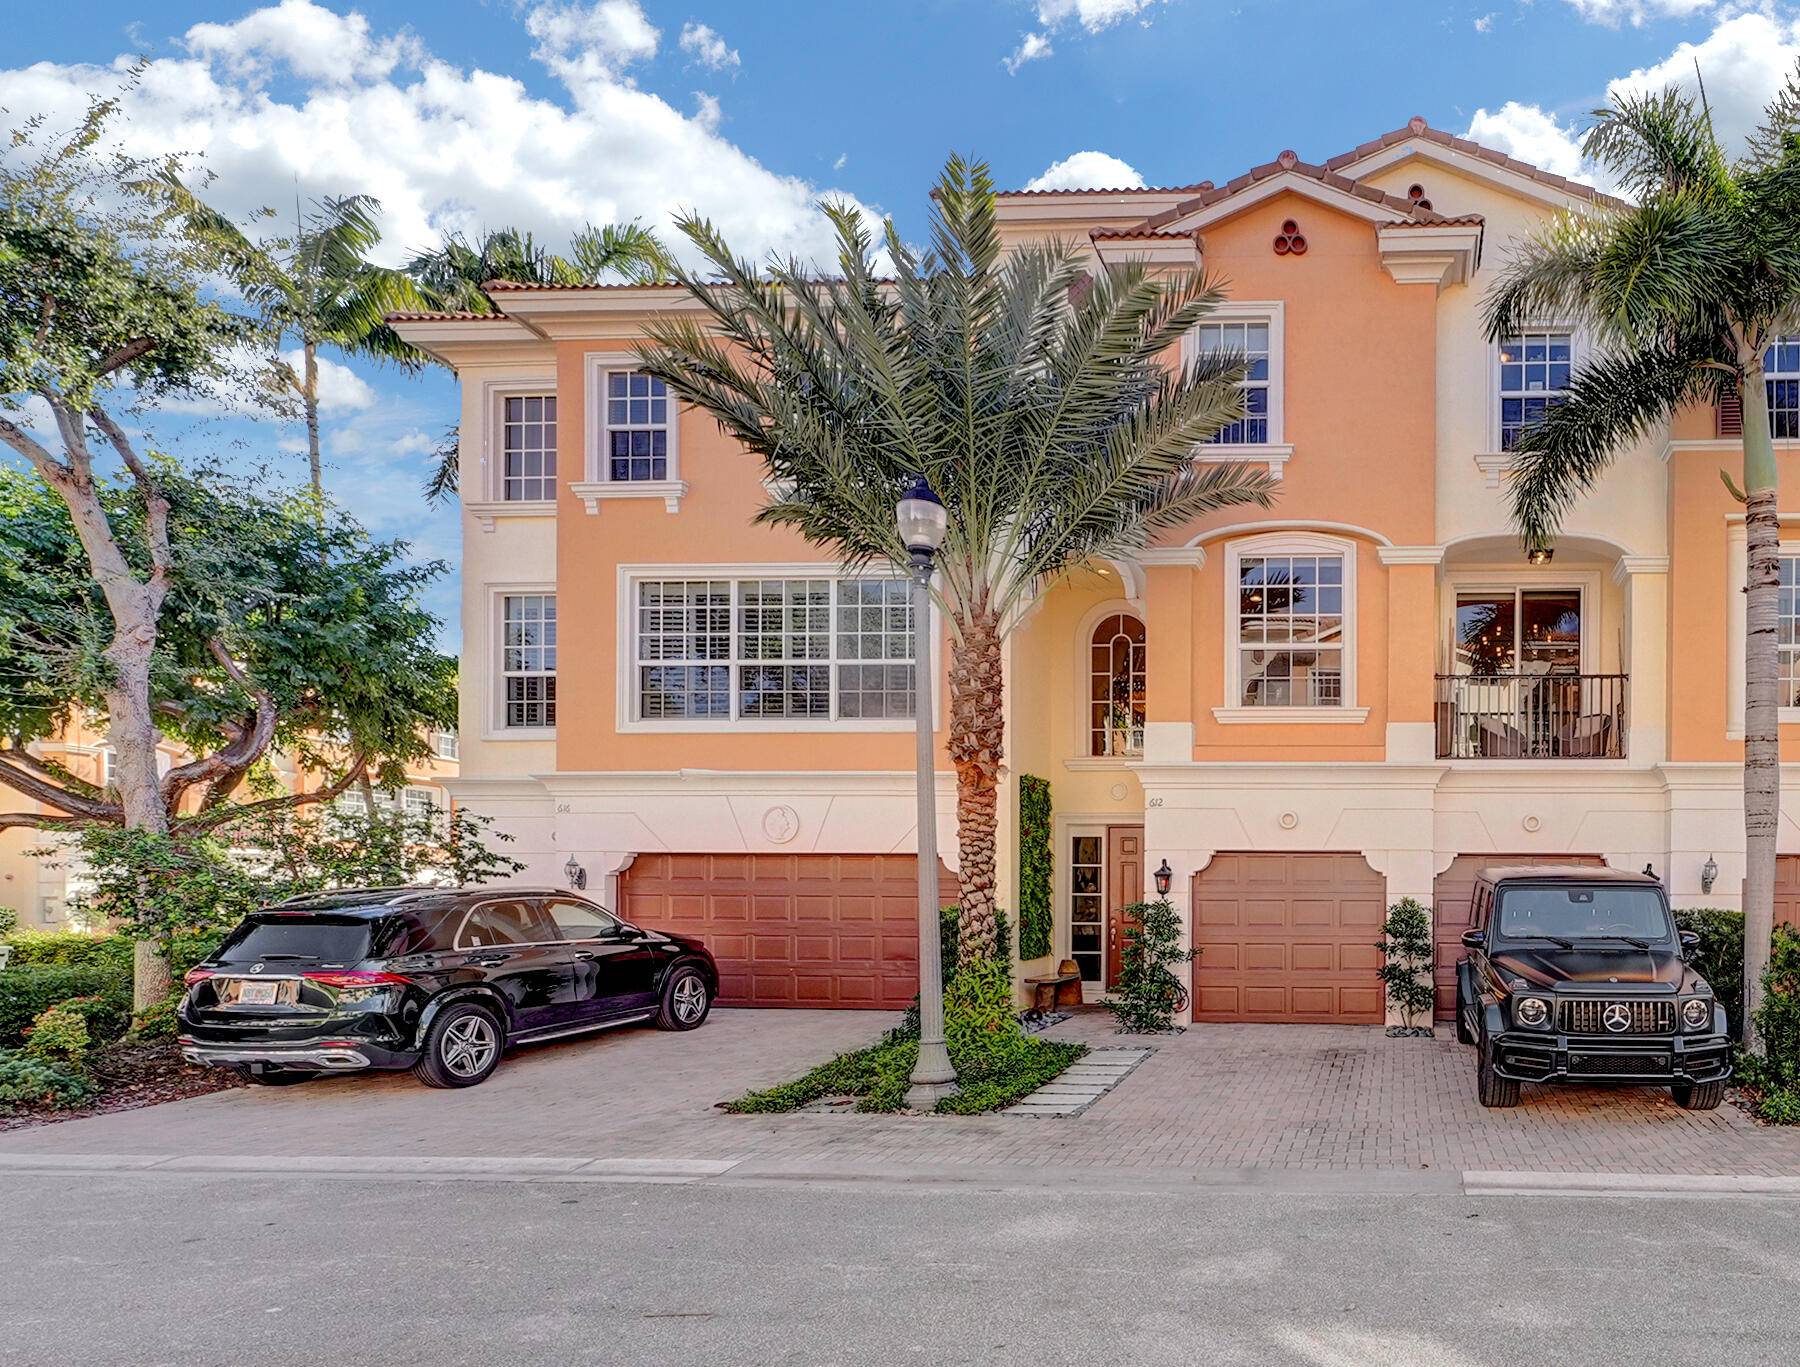 Presenting an exquisite luxury townhome crafted by Toll Brothers, ideally situated in the heart of East Boca Raton.